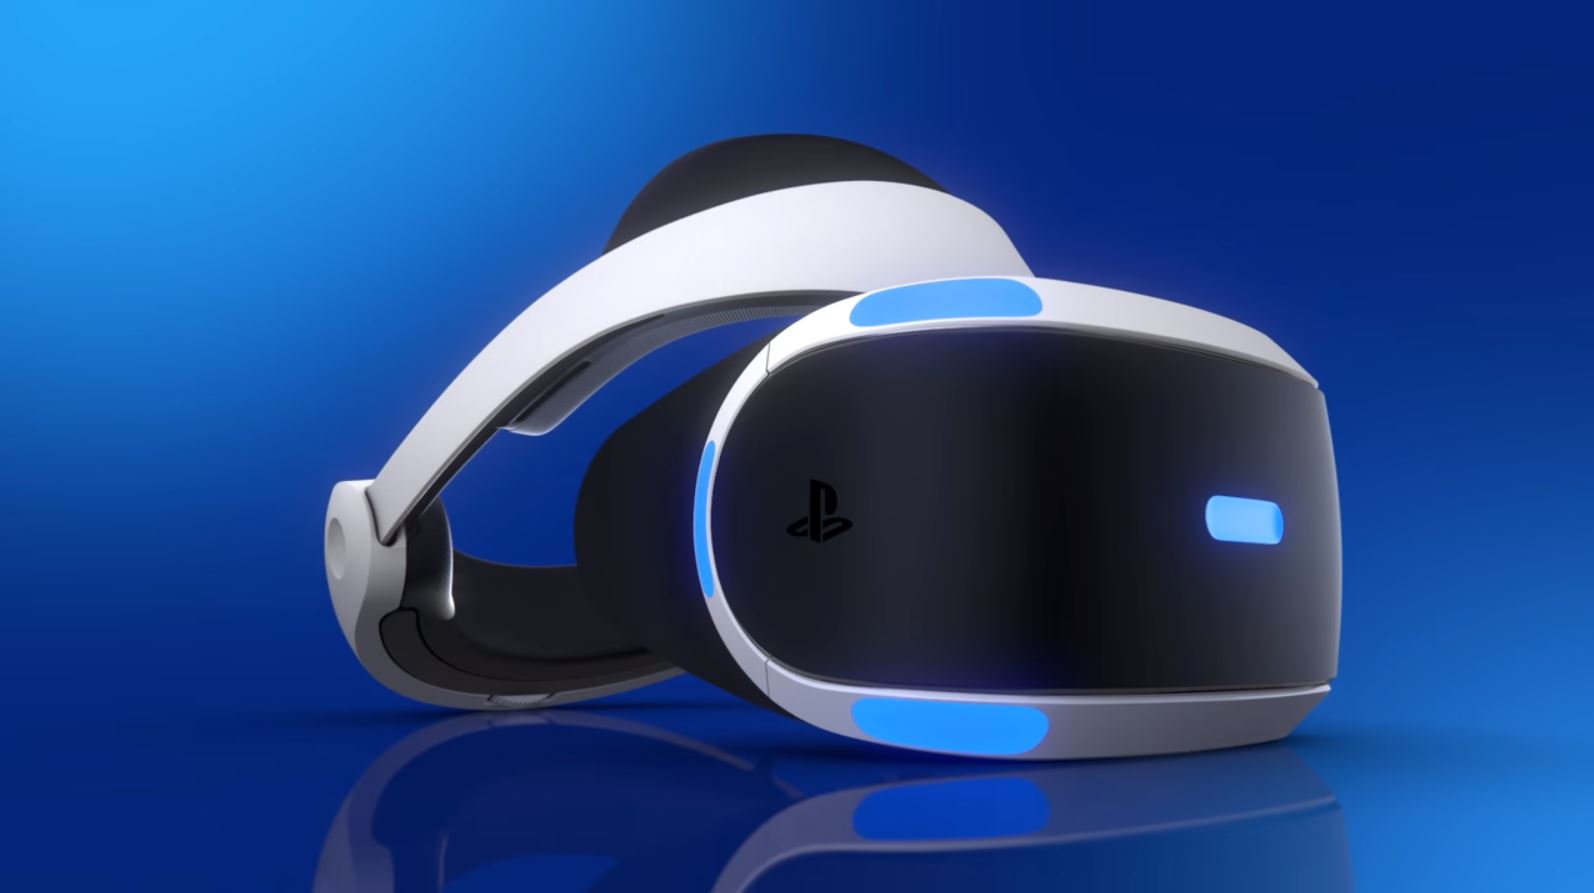 Playstation VR priced at $399, launches October 2016